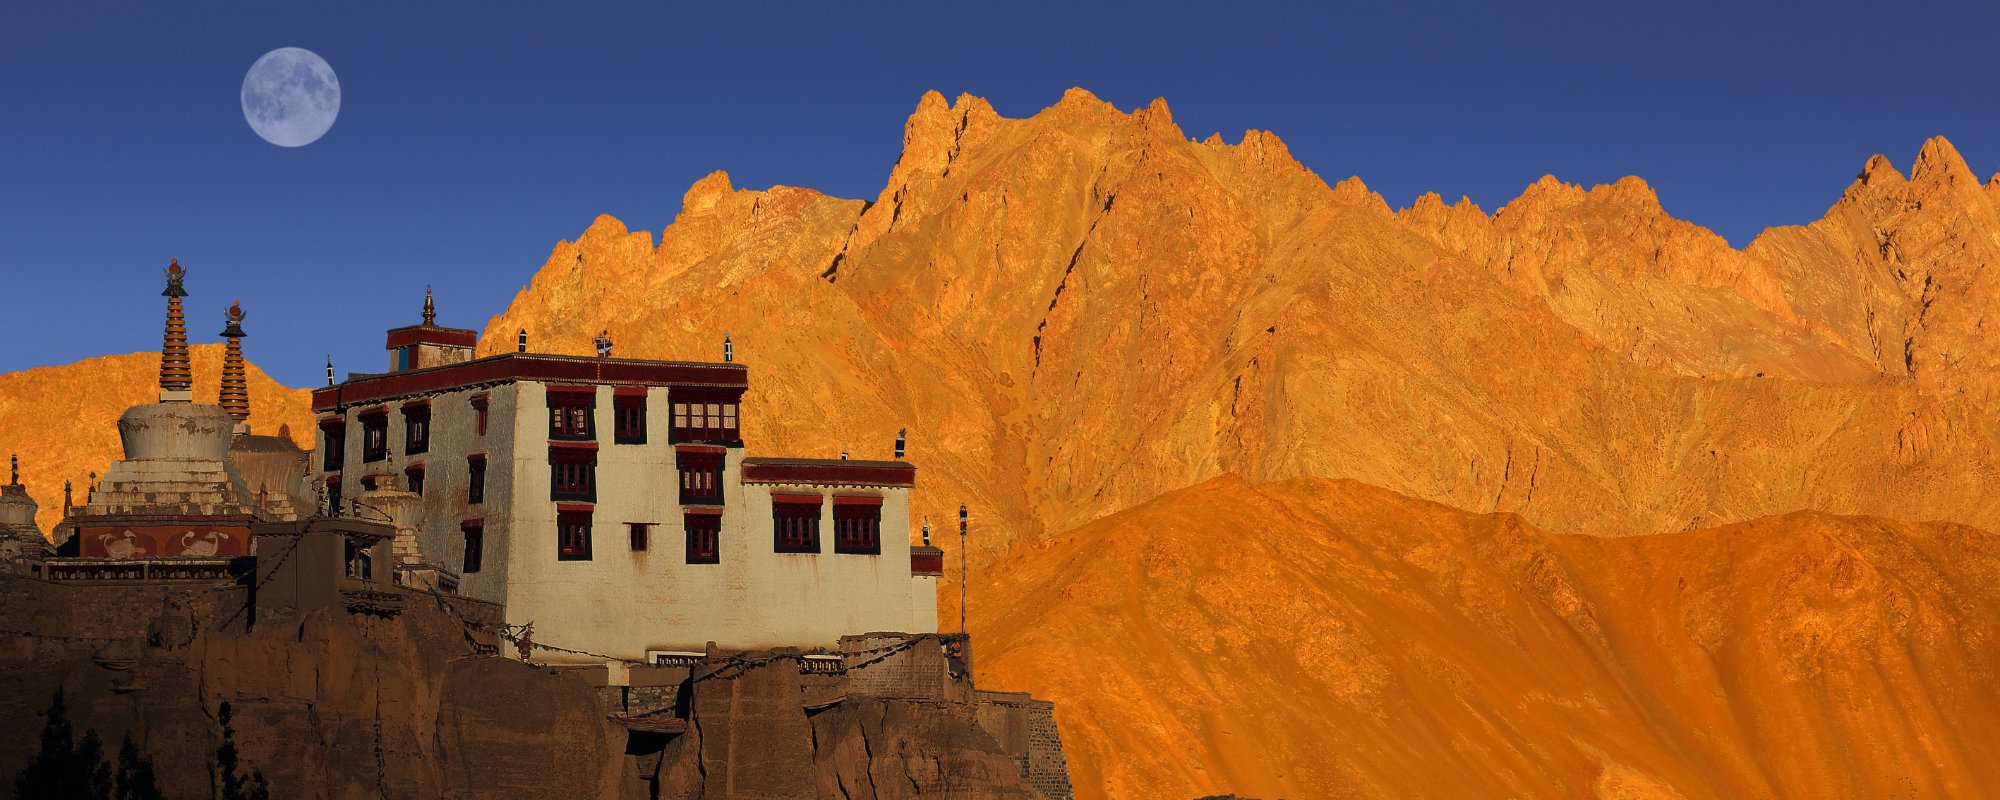 Top 5 Monasteries in Ladakh to Explore and Experience Spiritual Tranquility